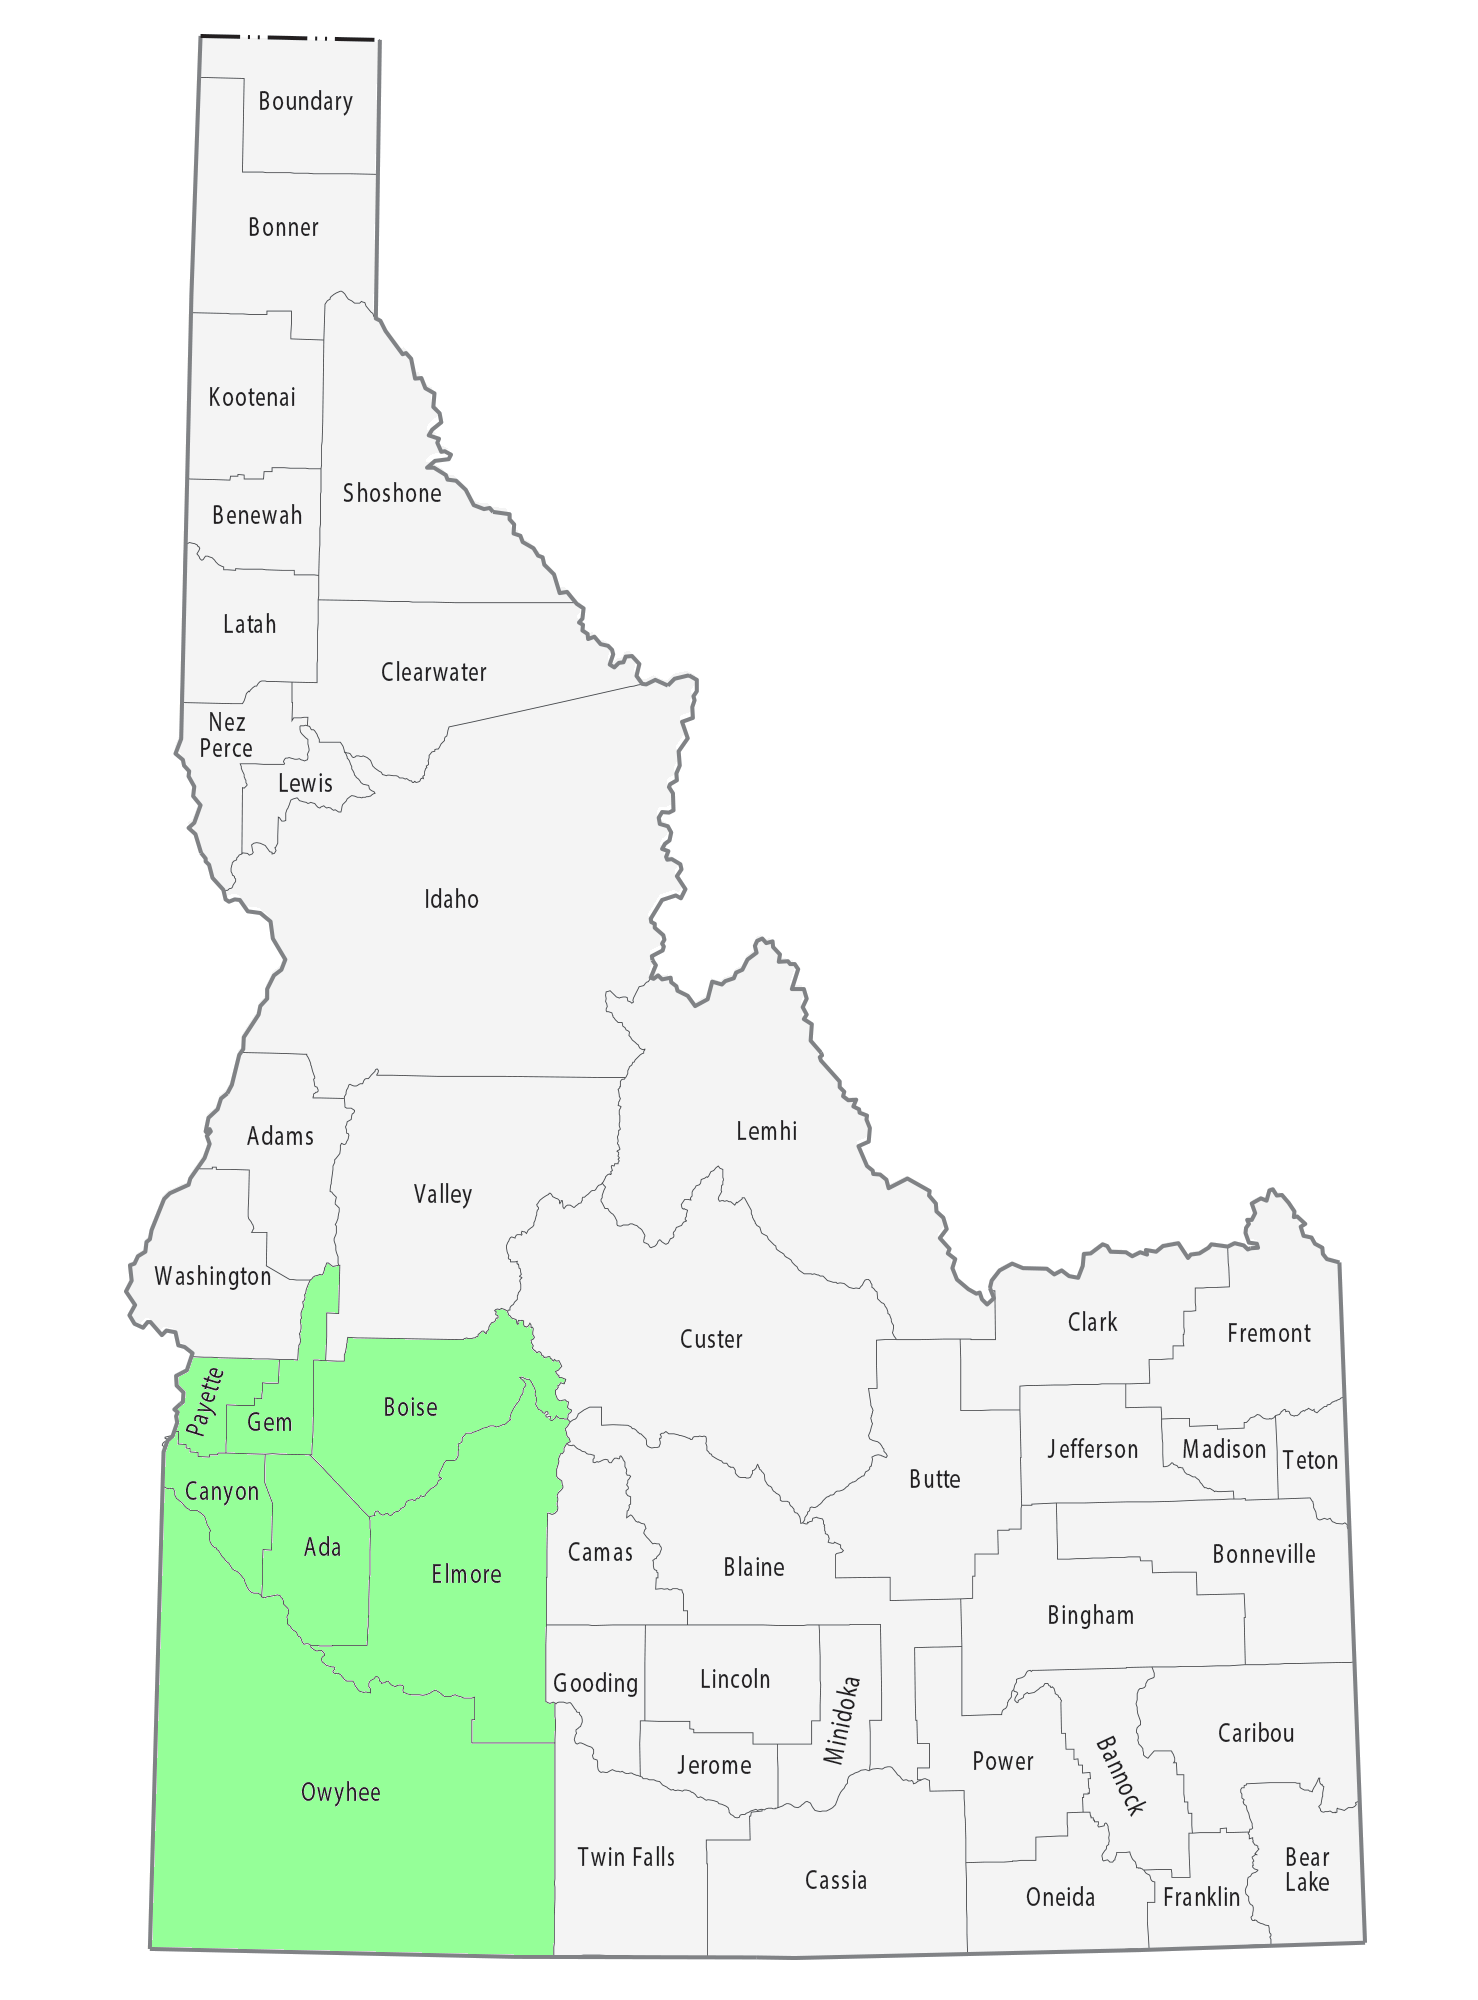 A map of Idaho showing the county lines and the coverage area of appraisals in green